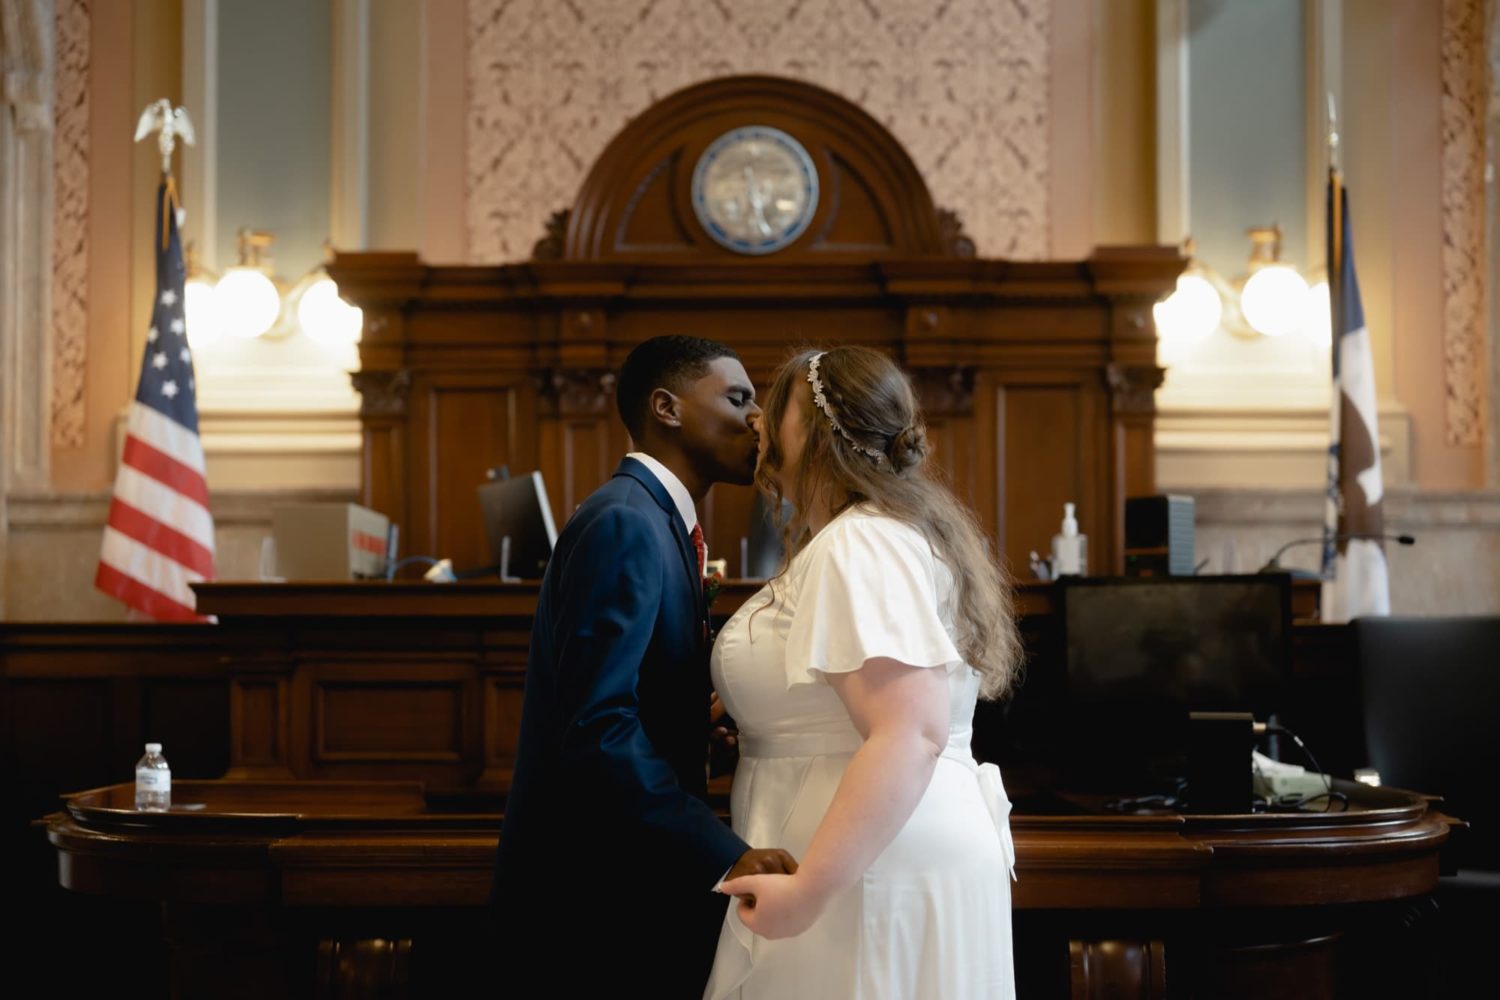 Bride and groom first kiss at a courthouse wedding